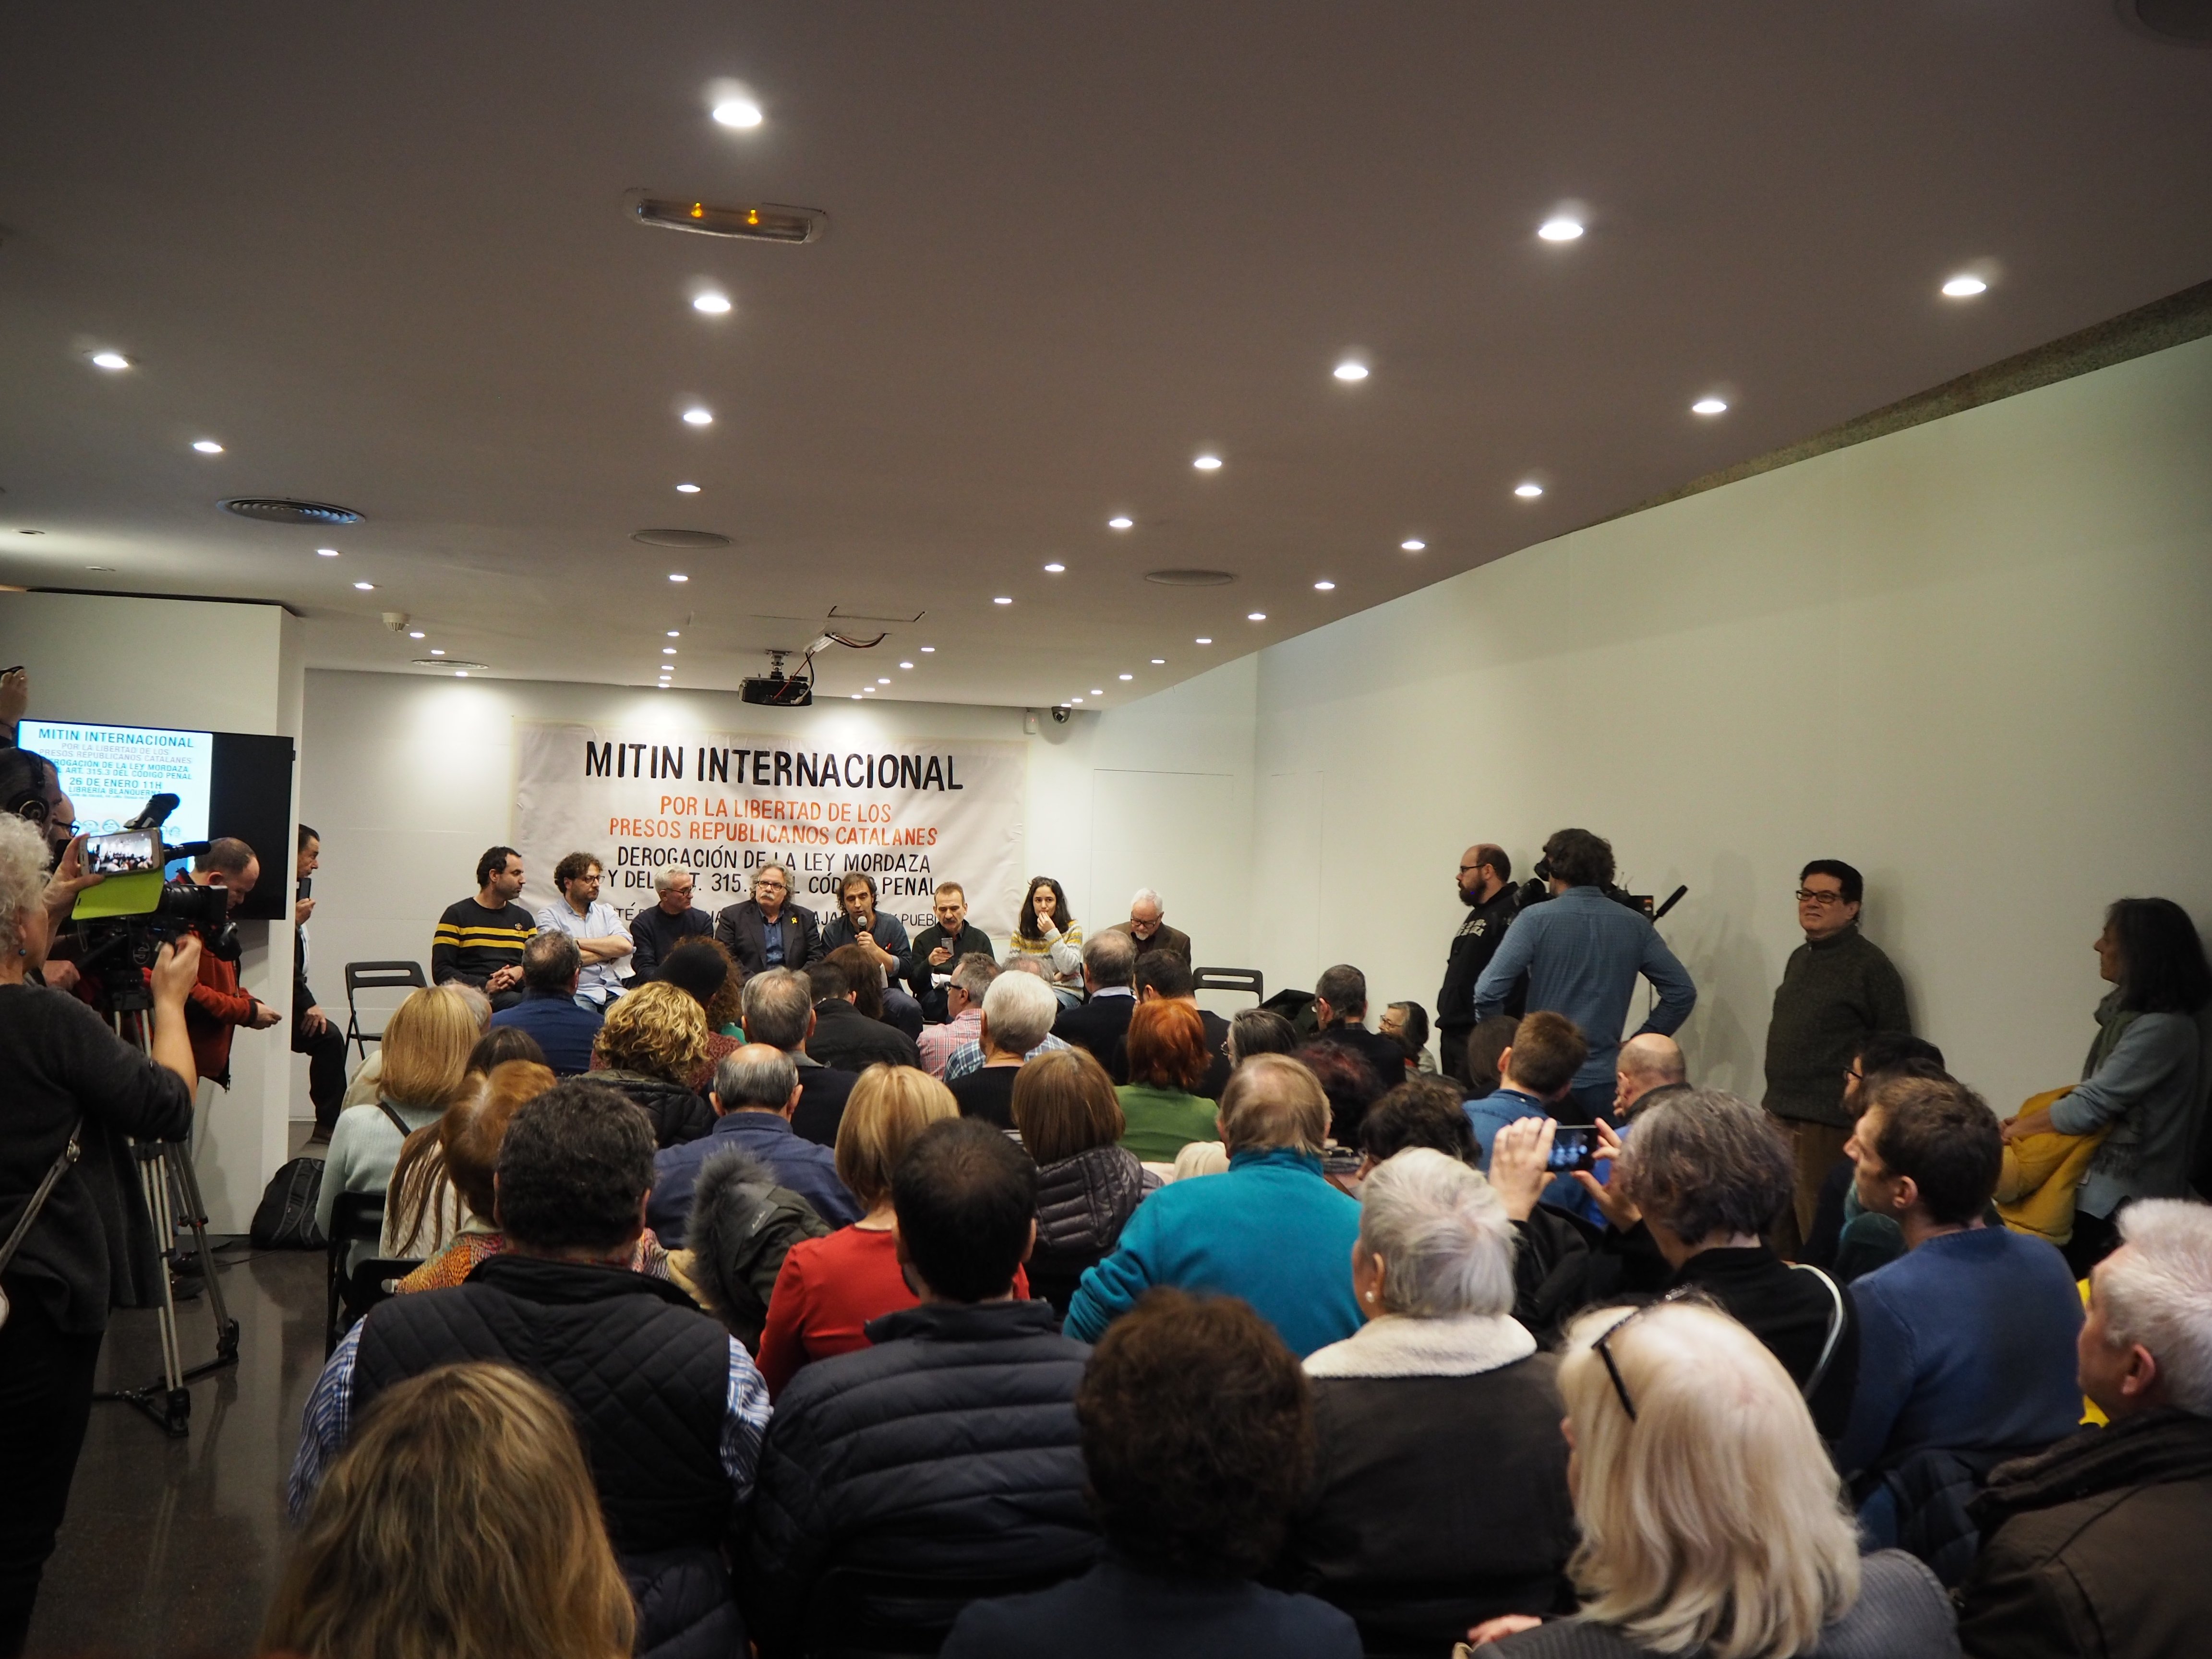 Full house at Madrid meeting to demand release of the Catalan prisoners